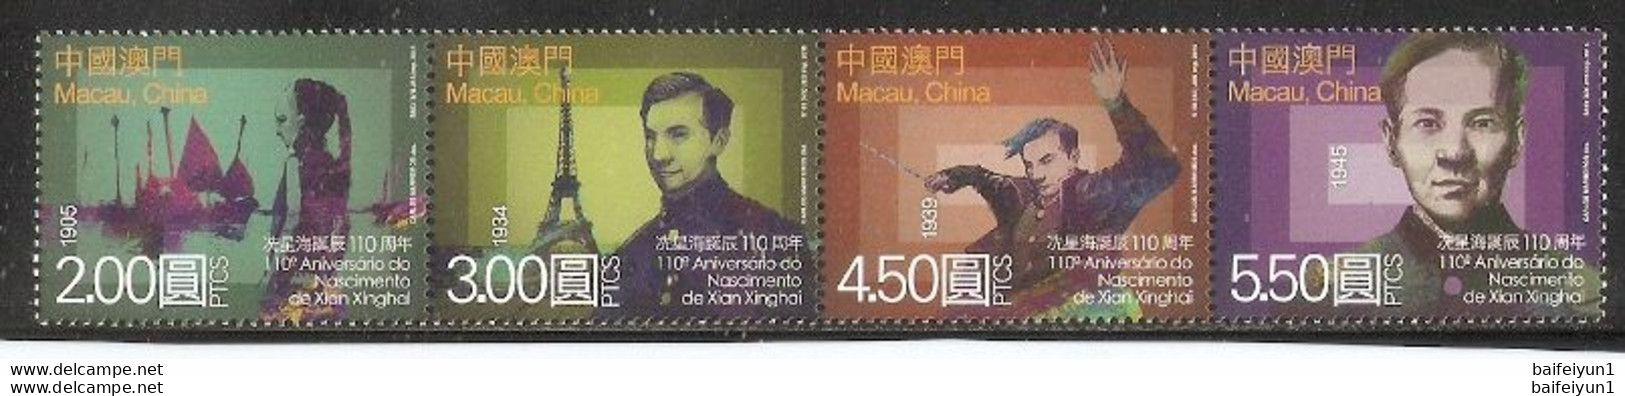 China Macau 2015 The Chinese Composer Xian Xinghai Or Sinn Sing Hoi STAMPS 4V - Cantantes